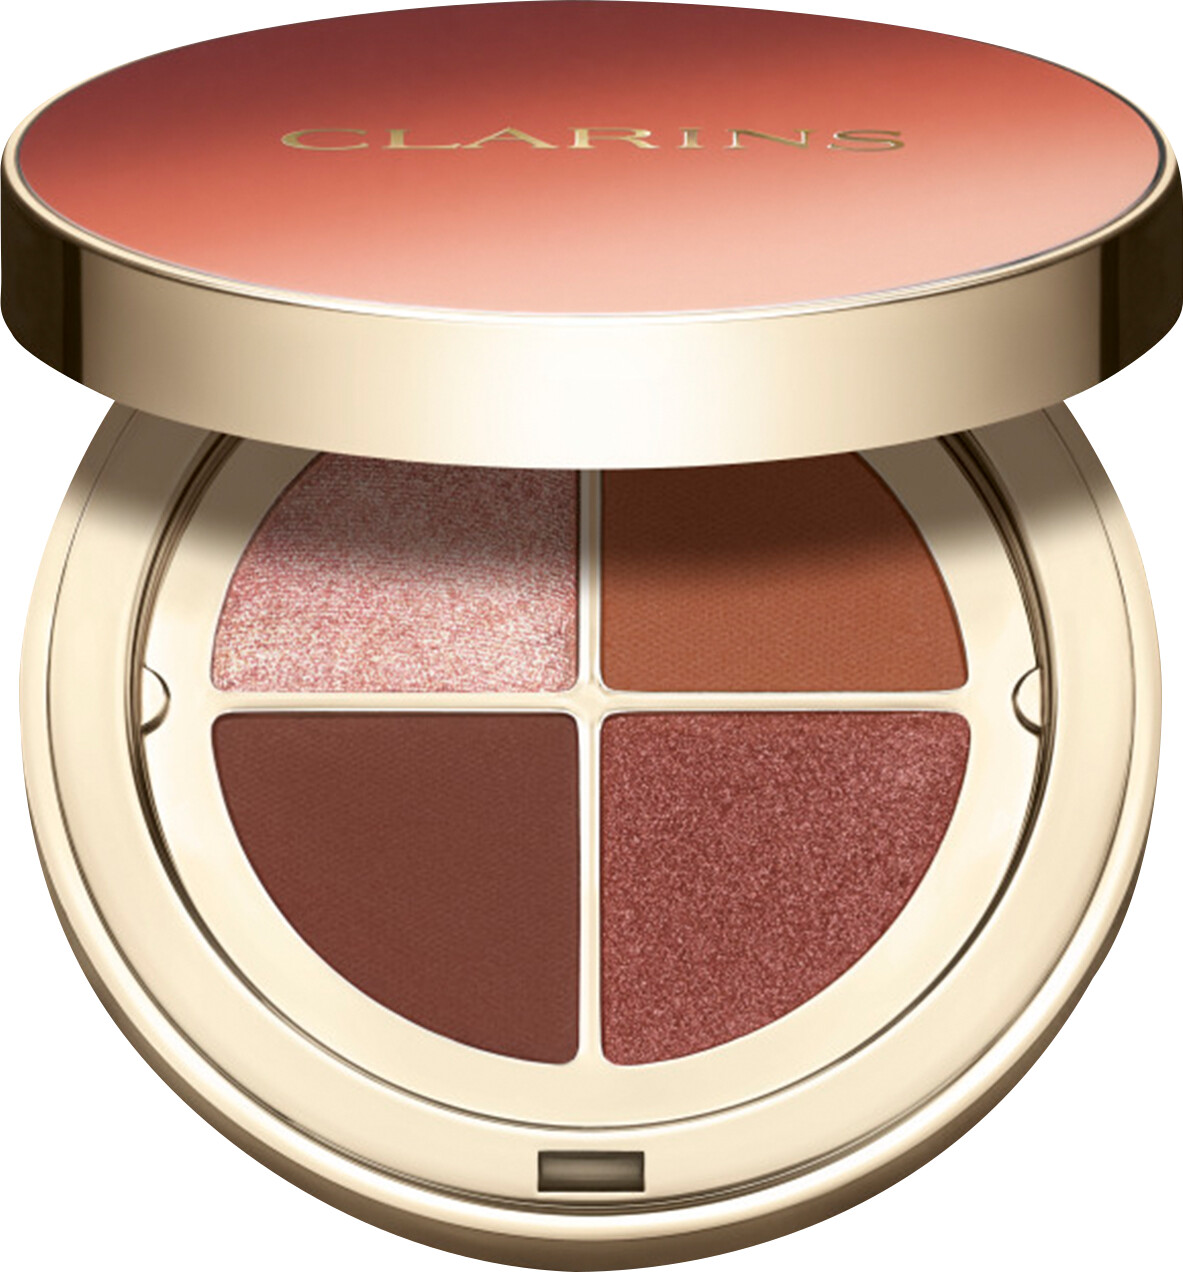 Clarins Ombre 4 Colour Eyeshadow Palette 4.2g 03 - Flame Gradation